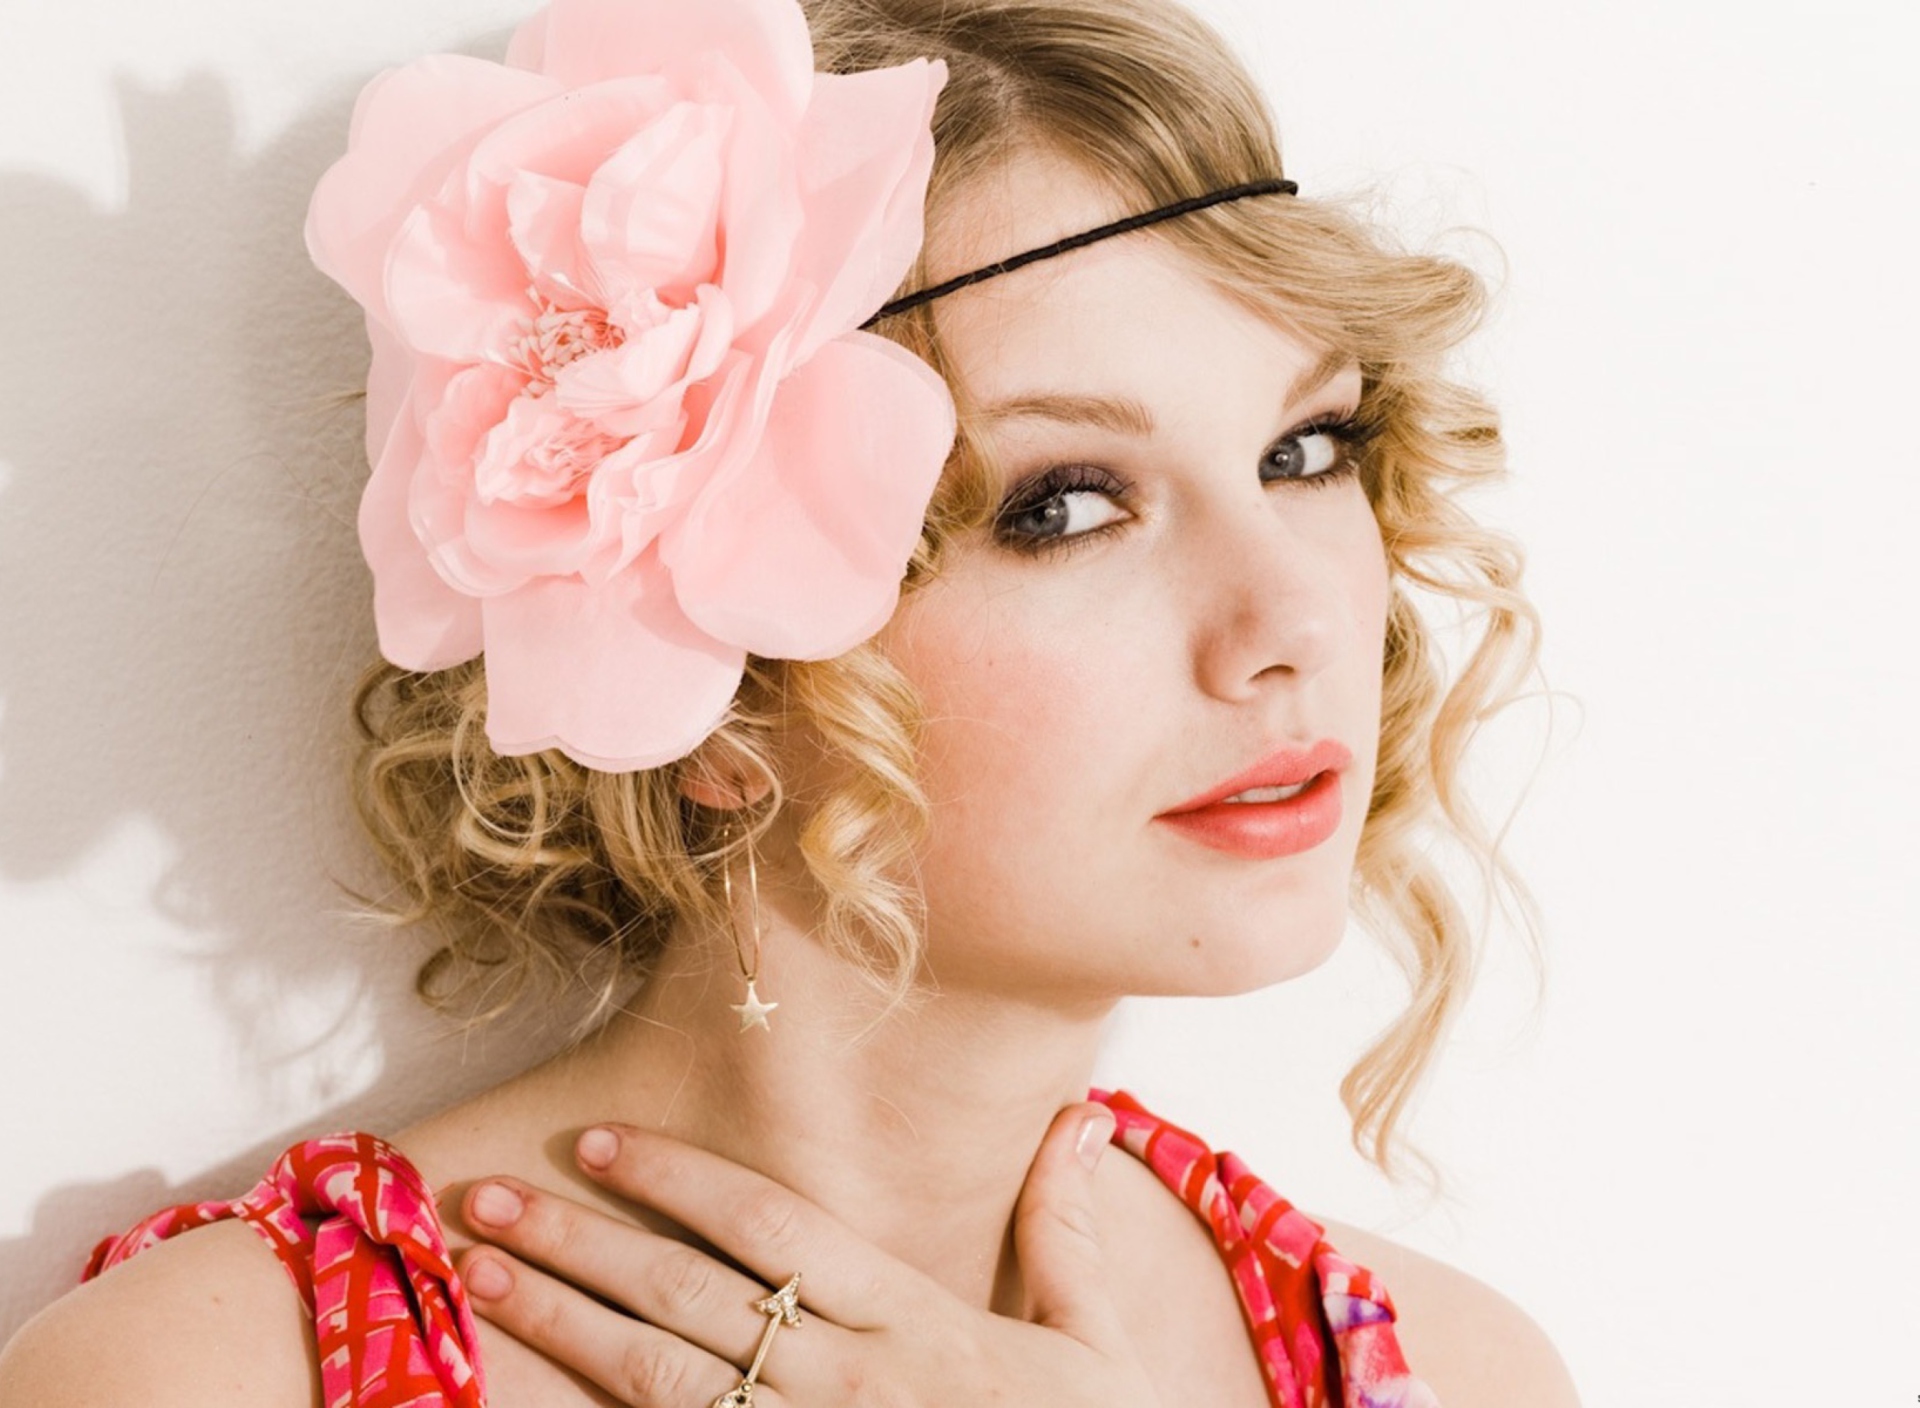 Taylor Swift With Pink Rose On Head screenshot #1 1920x1408